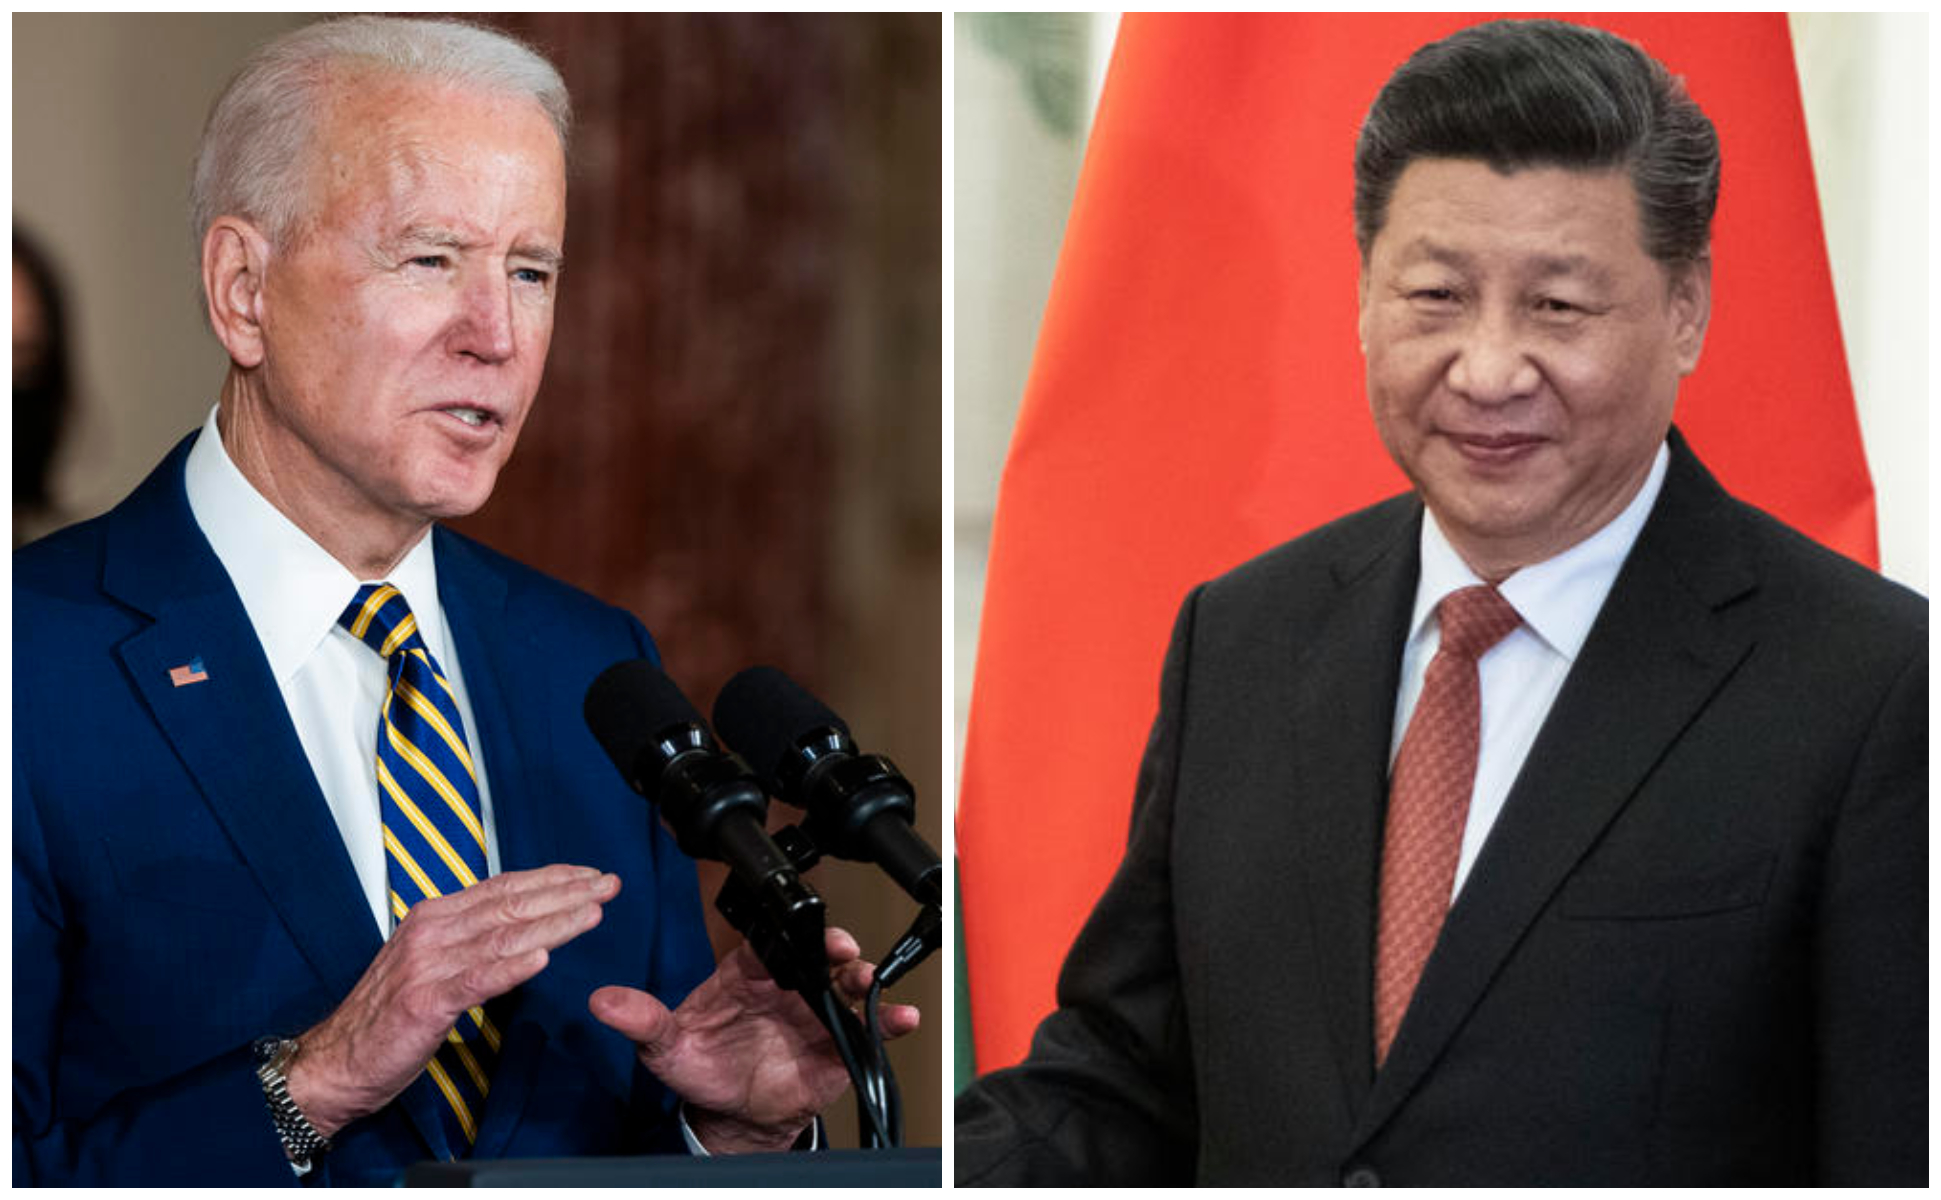 Biden Speaks with XI Jin Ping to after 7months.